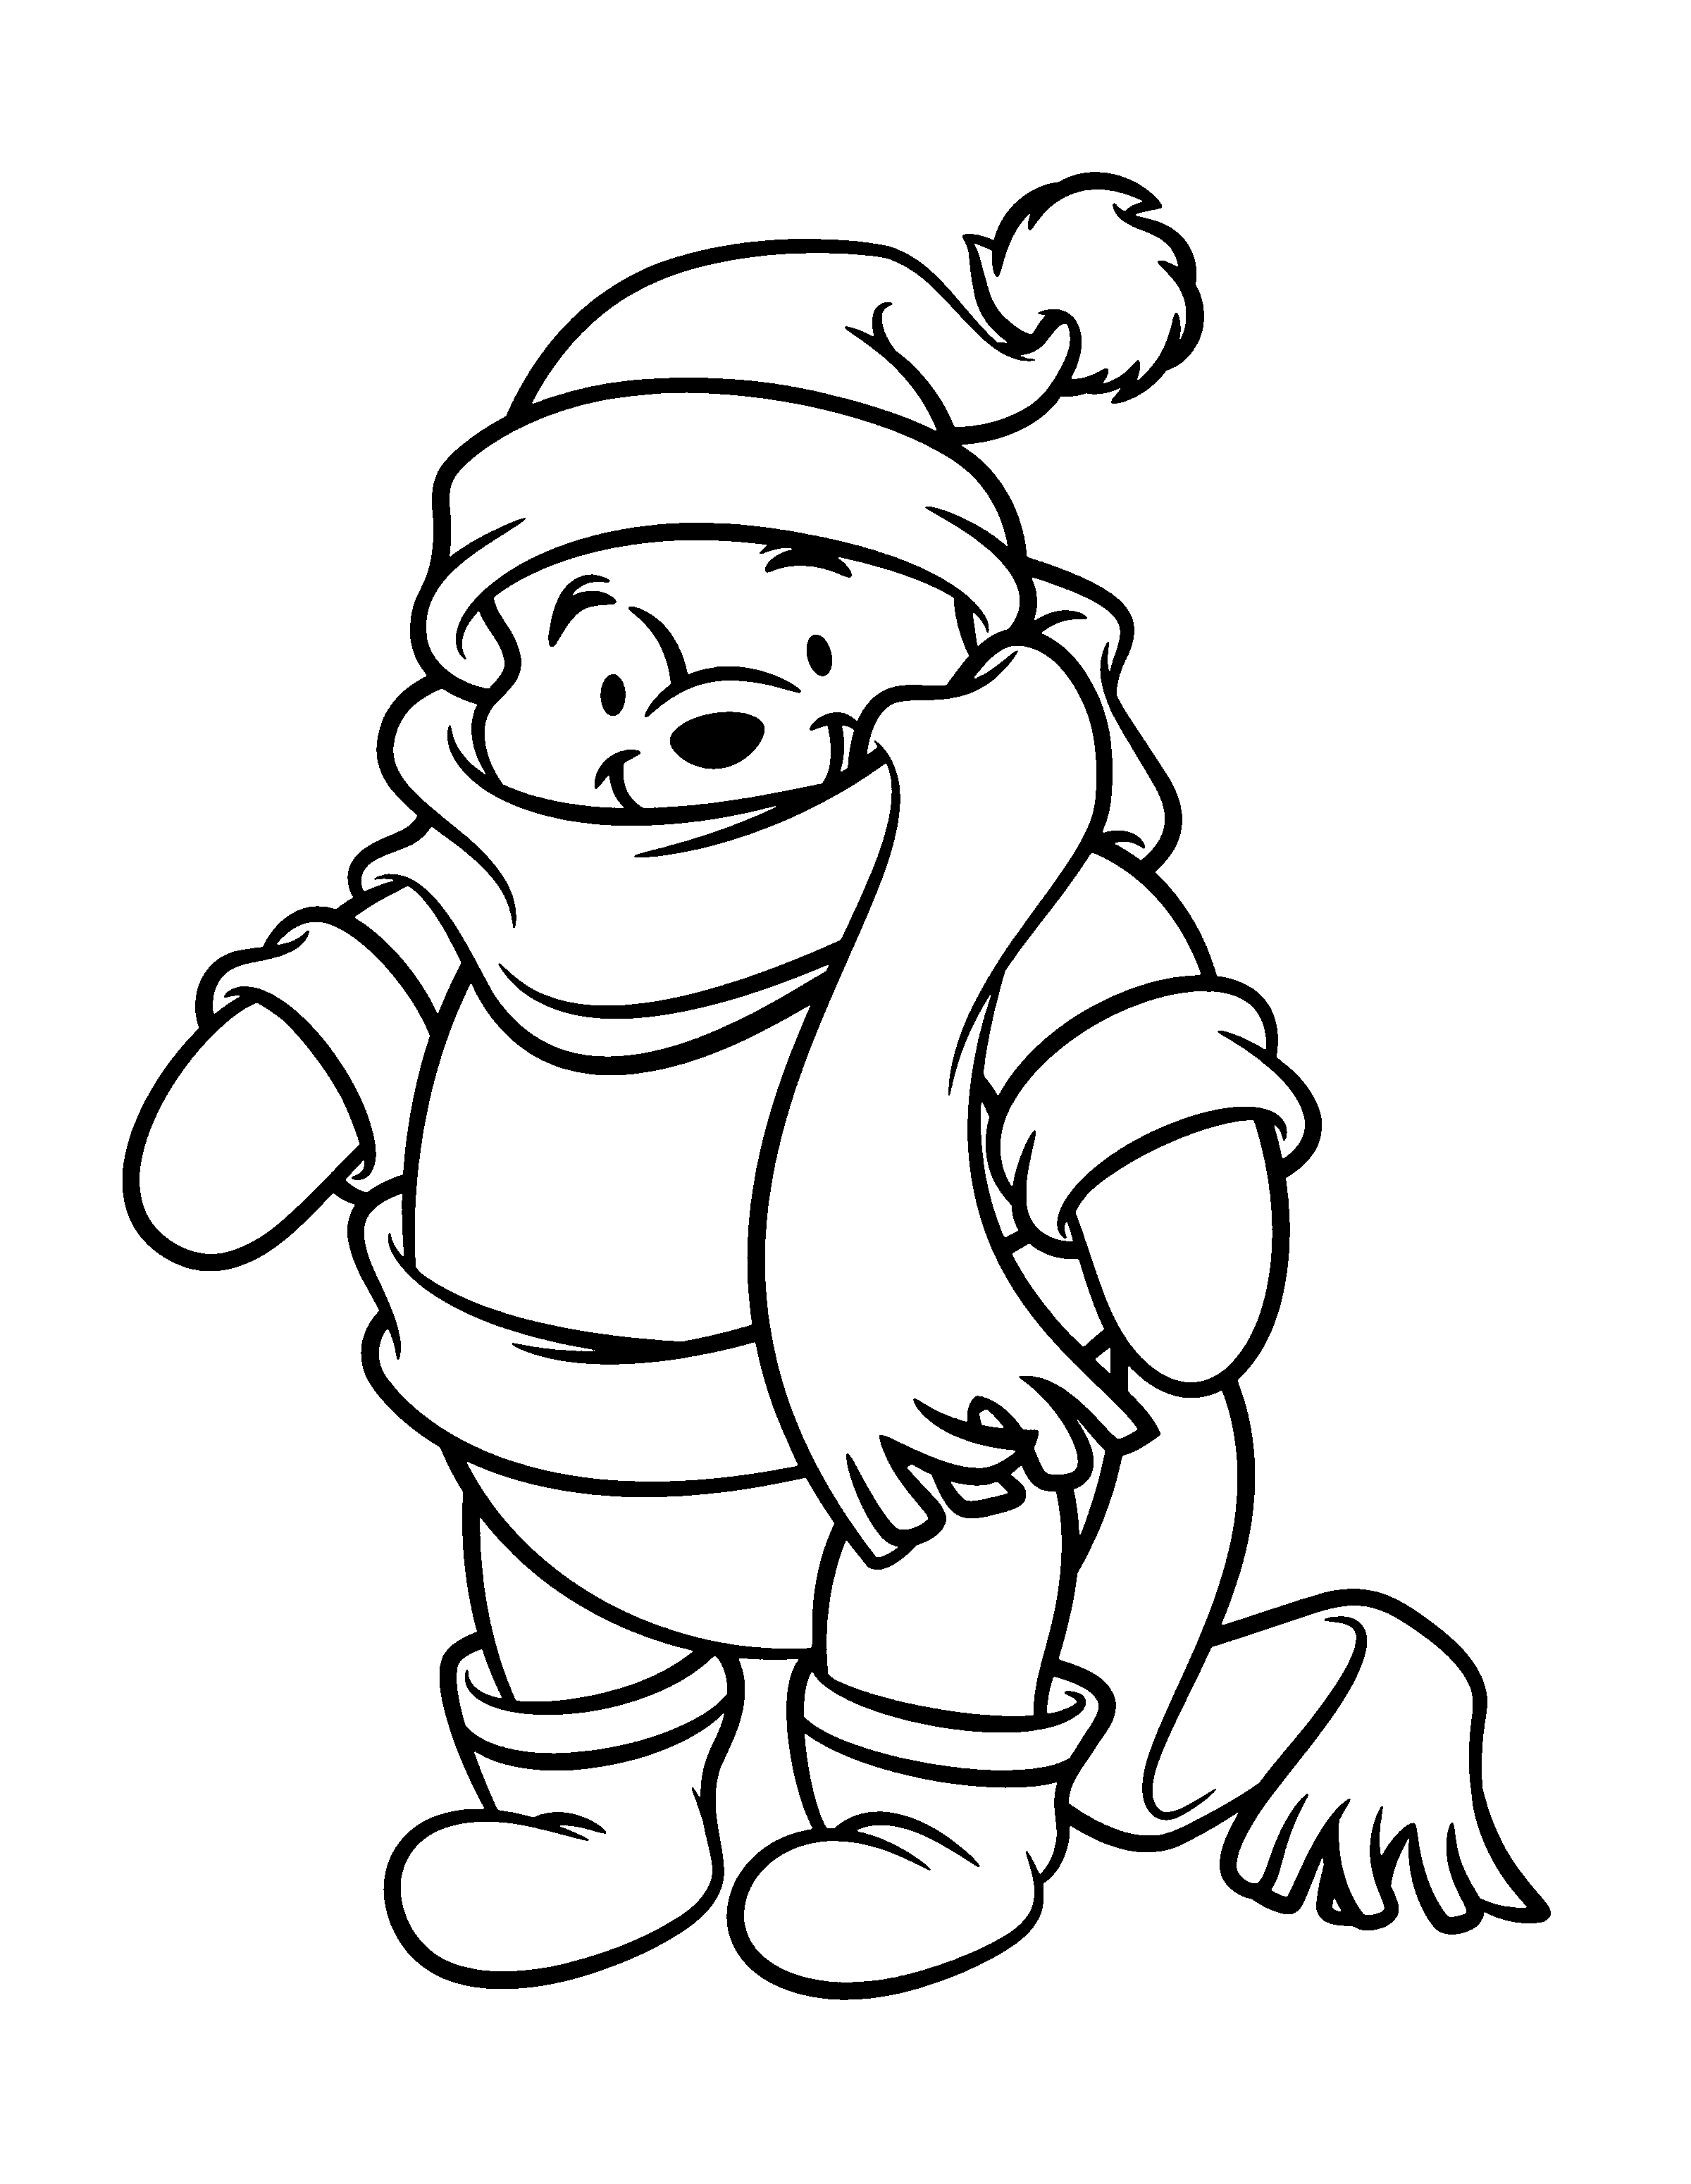 Pooh Dressed for Winter